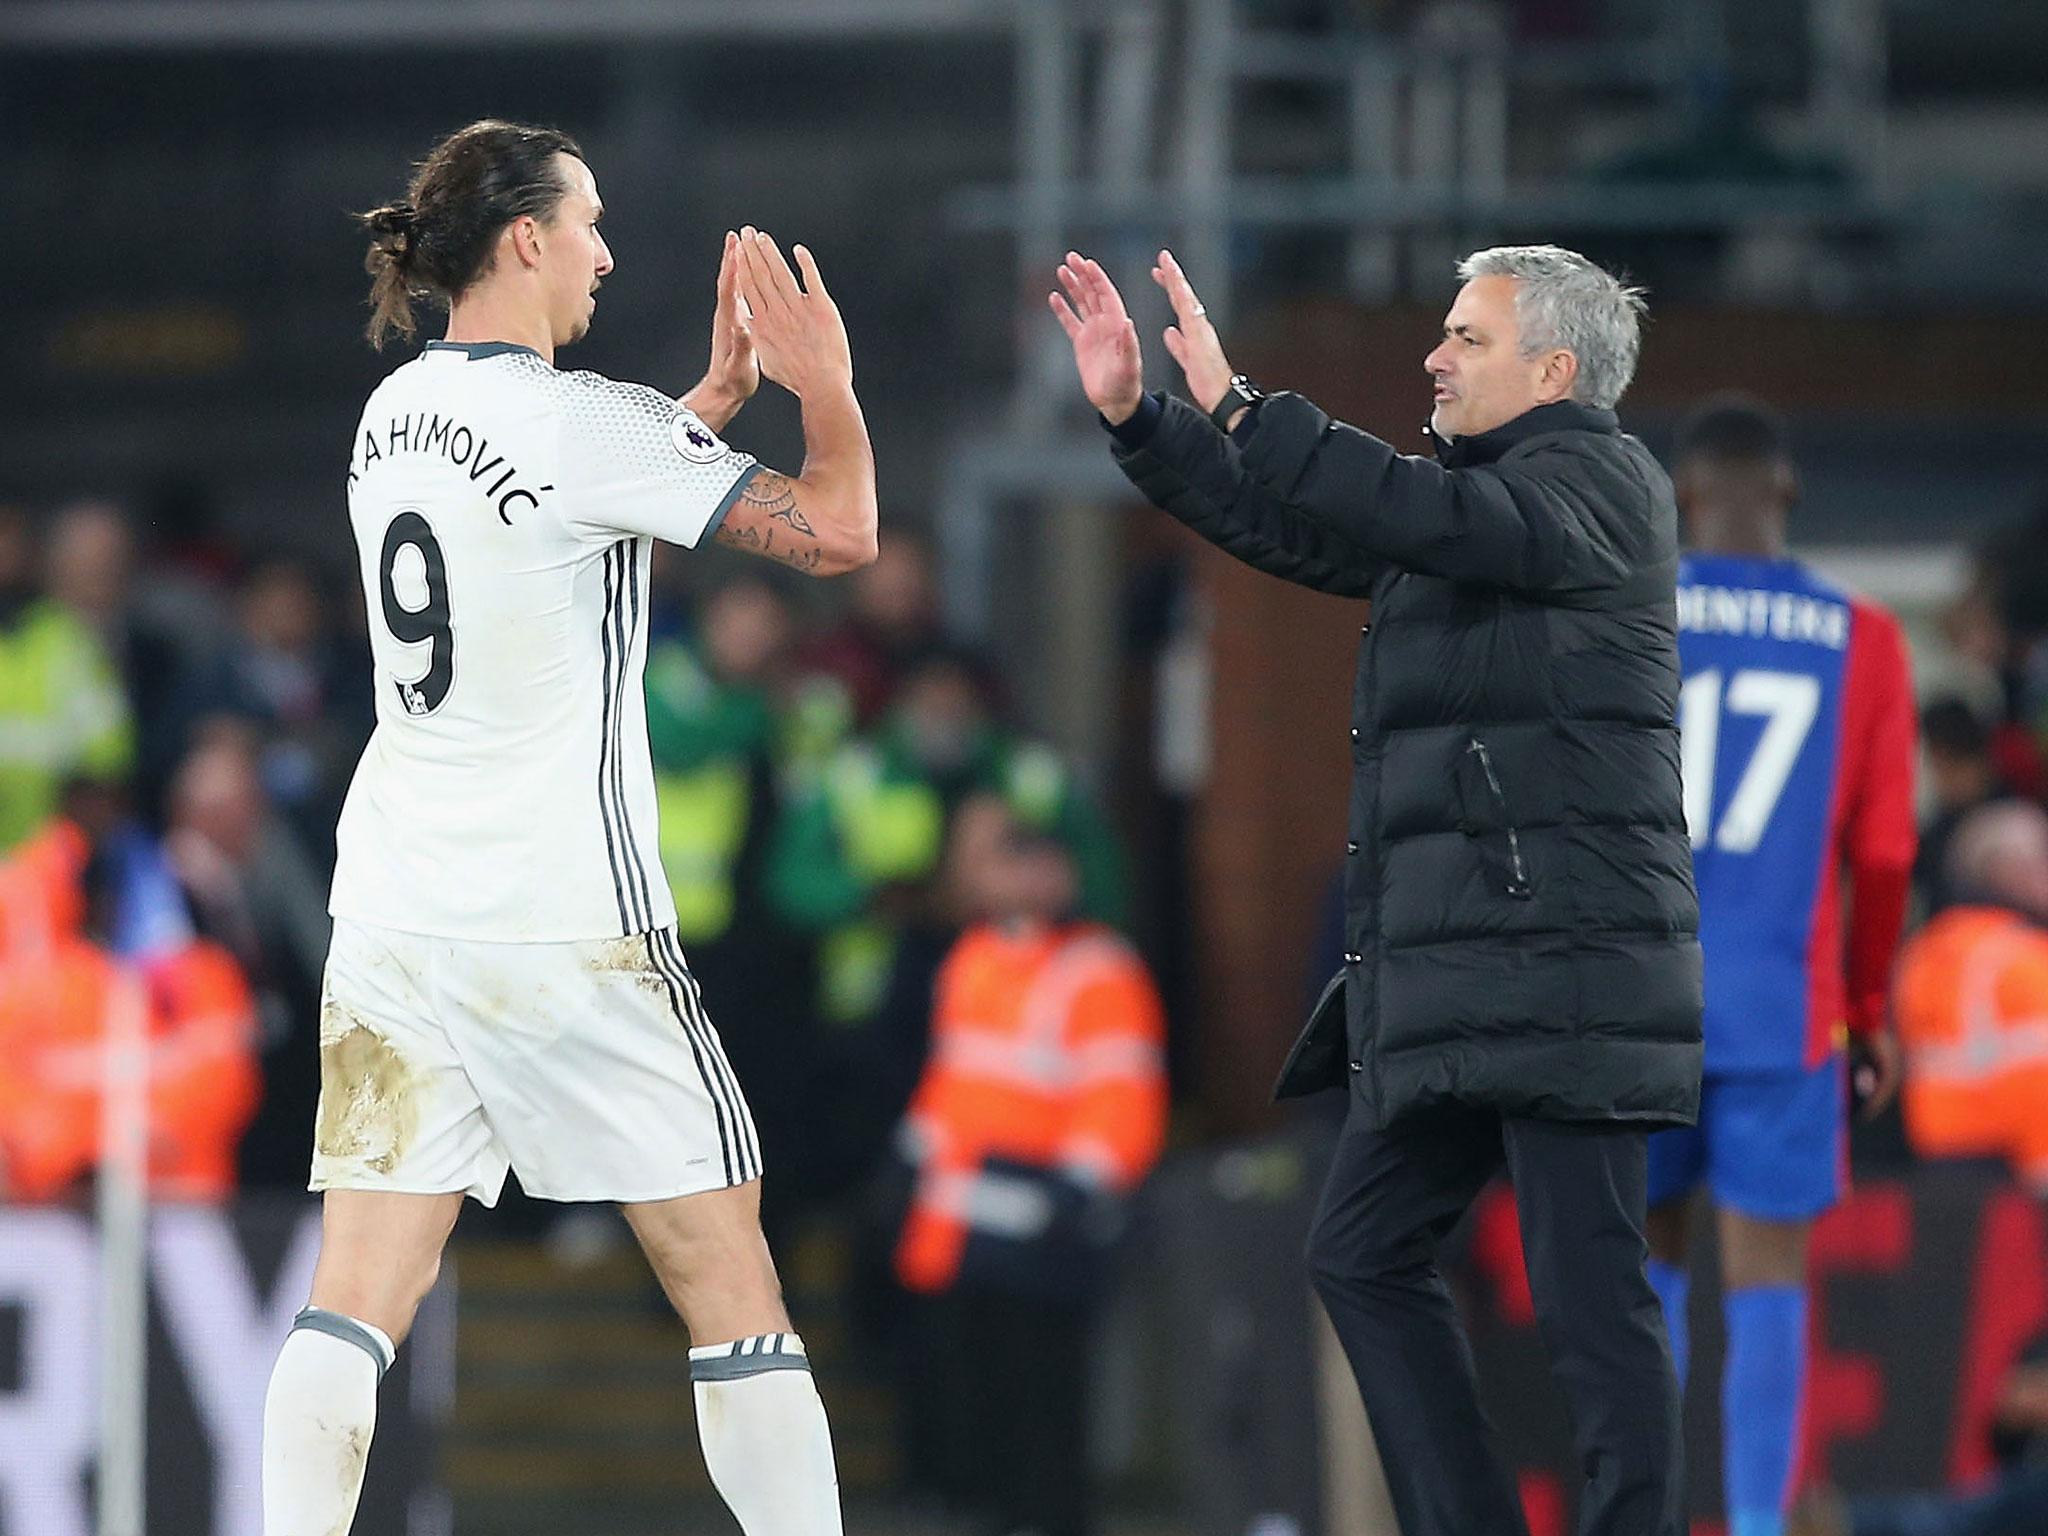 Jose Mourinho has vowed to support Zlatan Ibrahimovic whether he leaves Manchester United or not